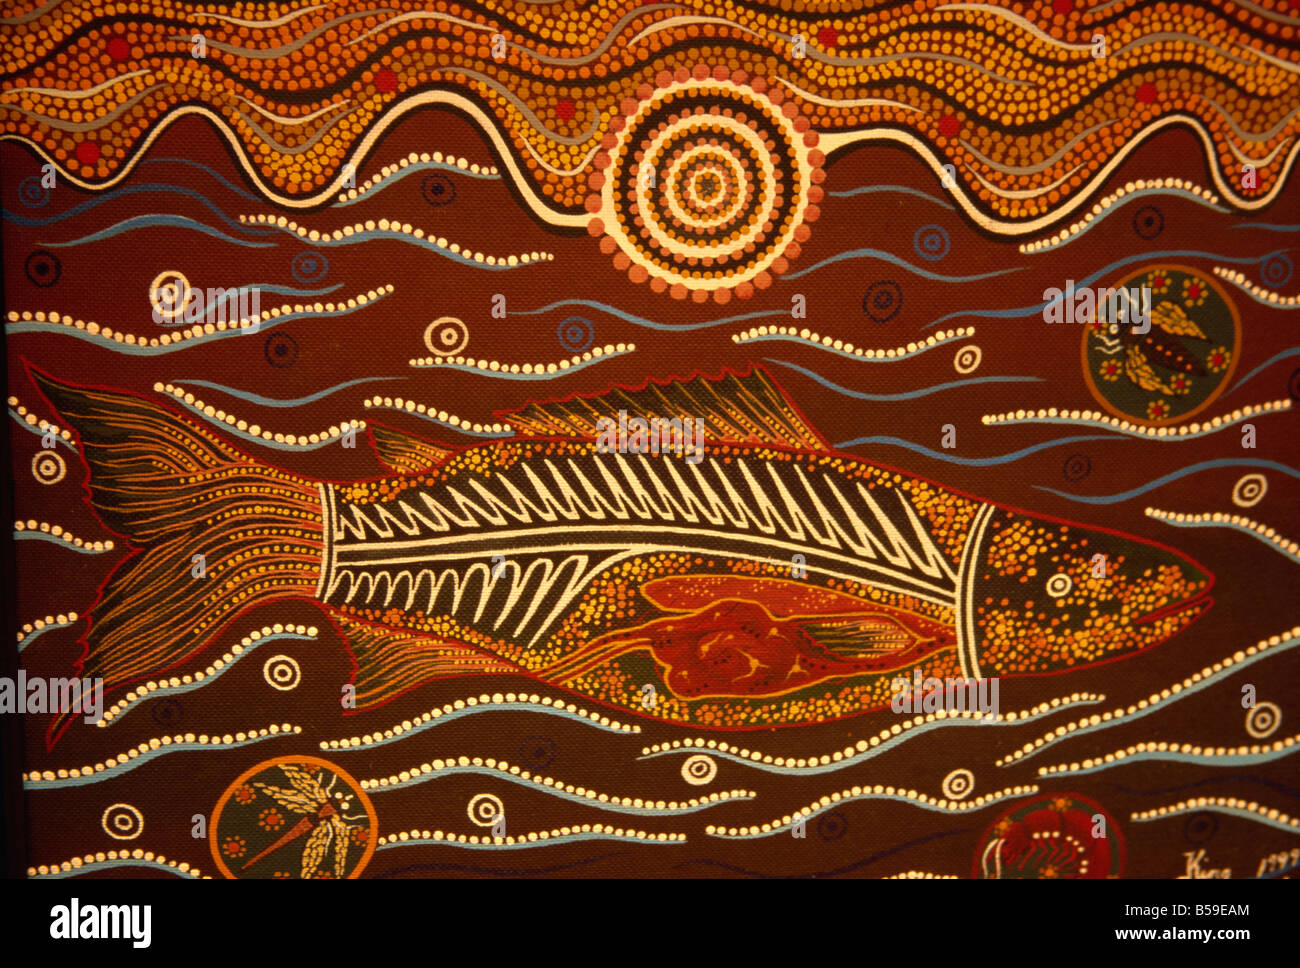 Dreamtime aboriginal stock photography and images - Alamy